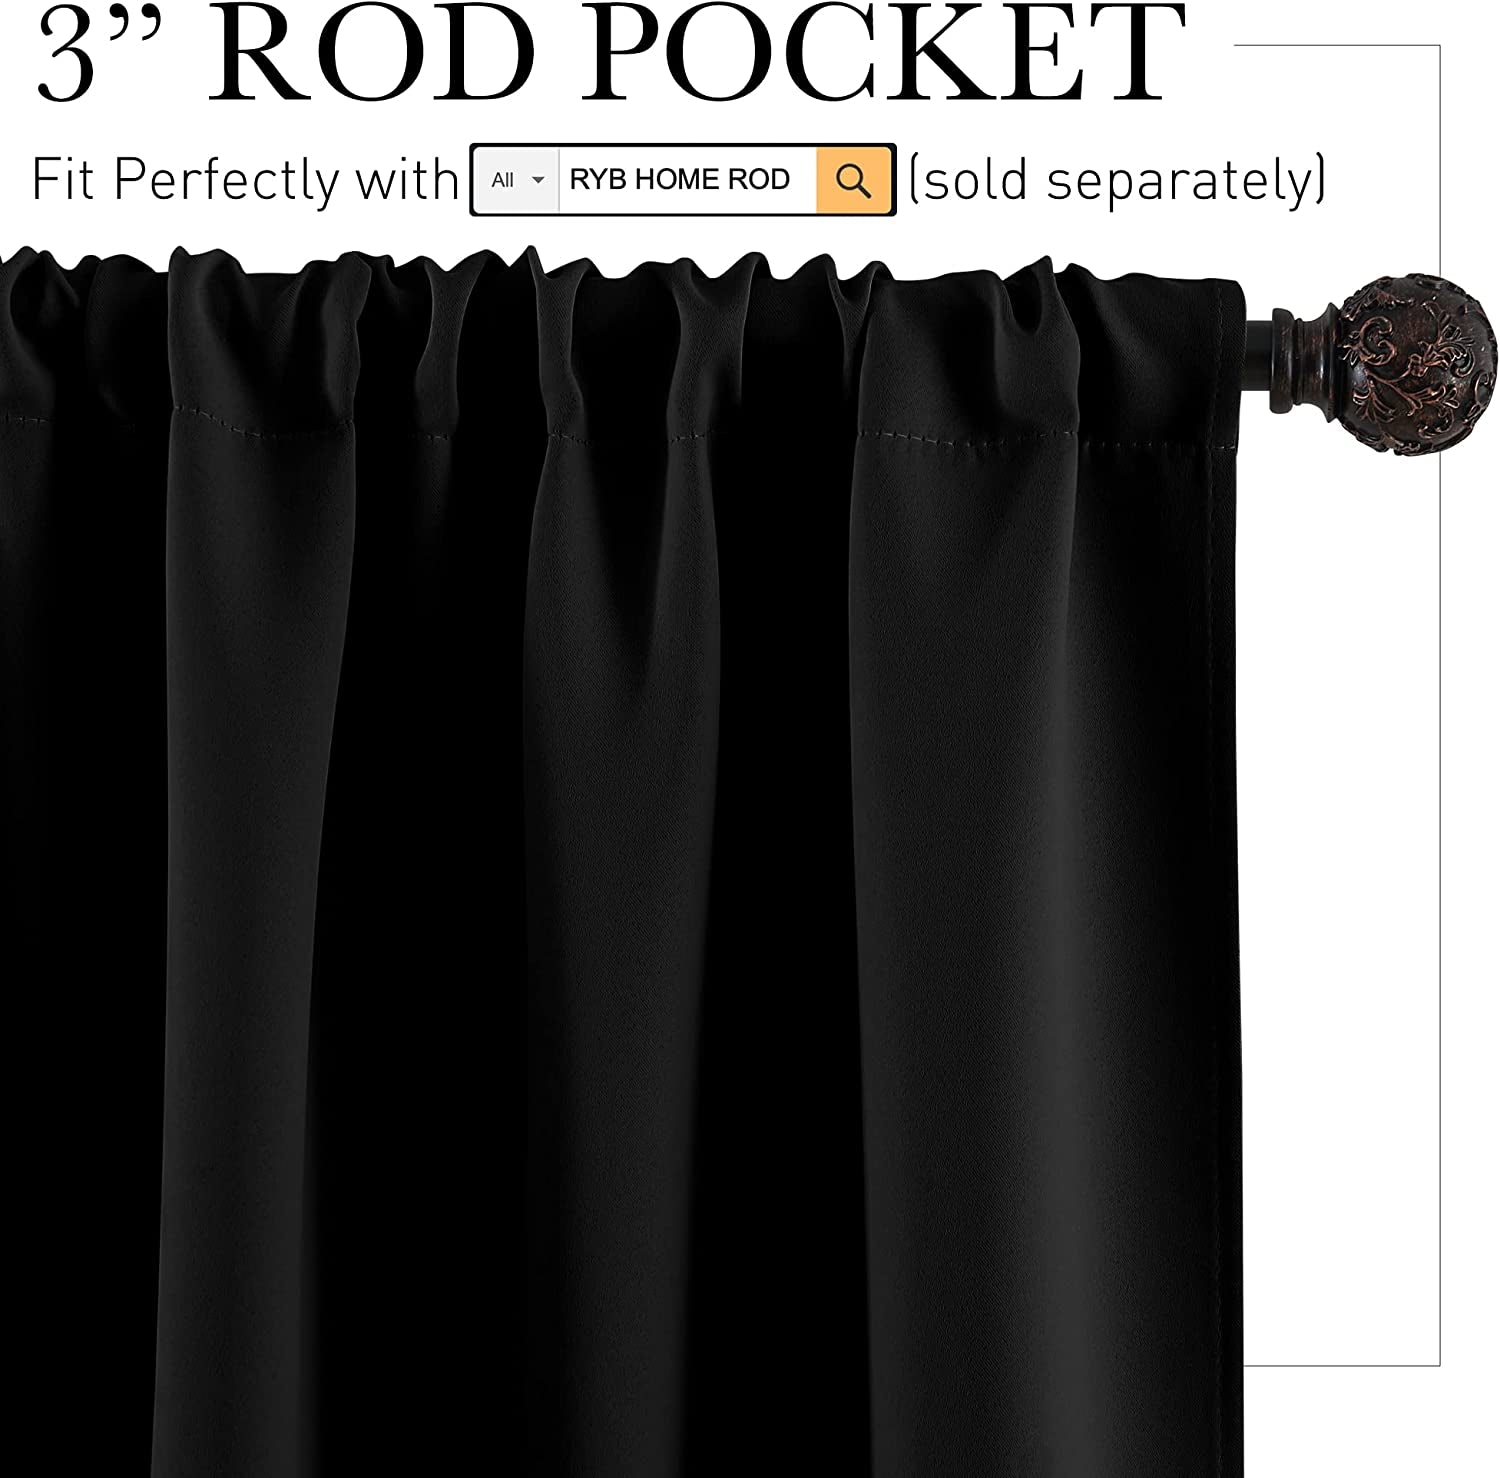 RYB HOME Black Curtains for Windows, Bathroom Curtains Small Window Drapery Blackout Curtains Privacy Drapes for Cafe Bedroom Curtains, Width 29 by Length 24, 1 Pair  RYB HOME   